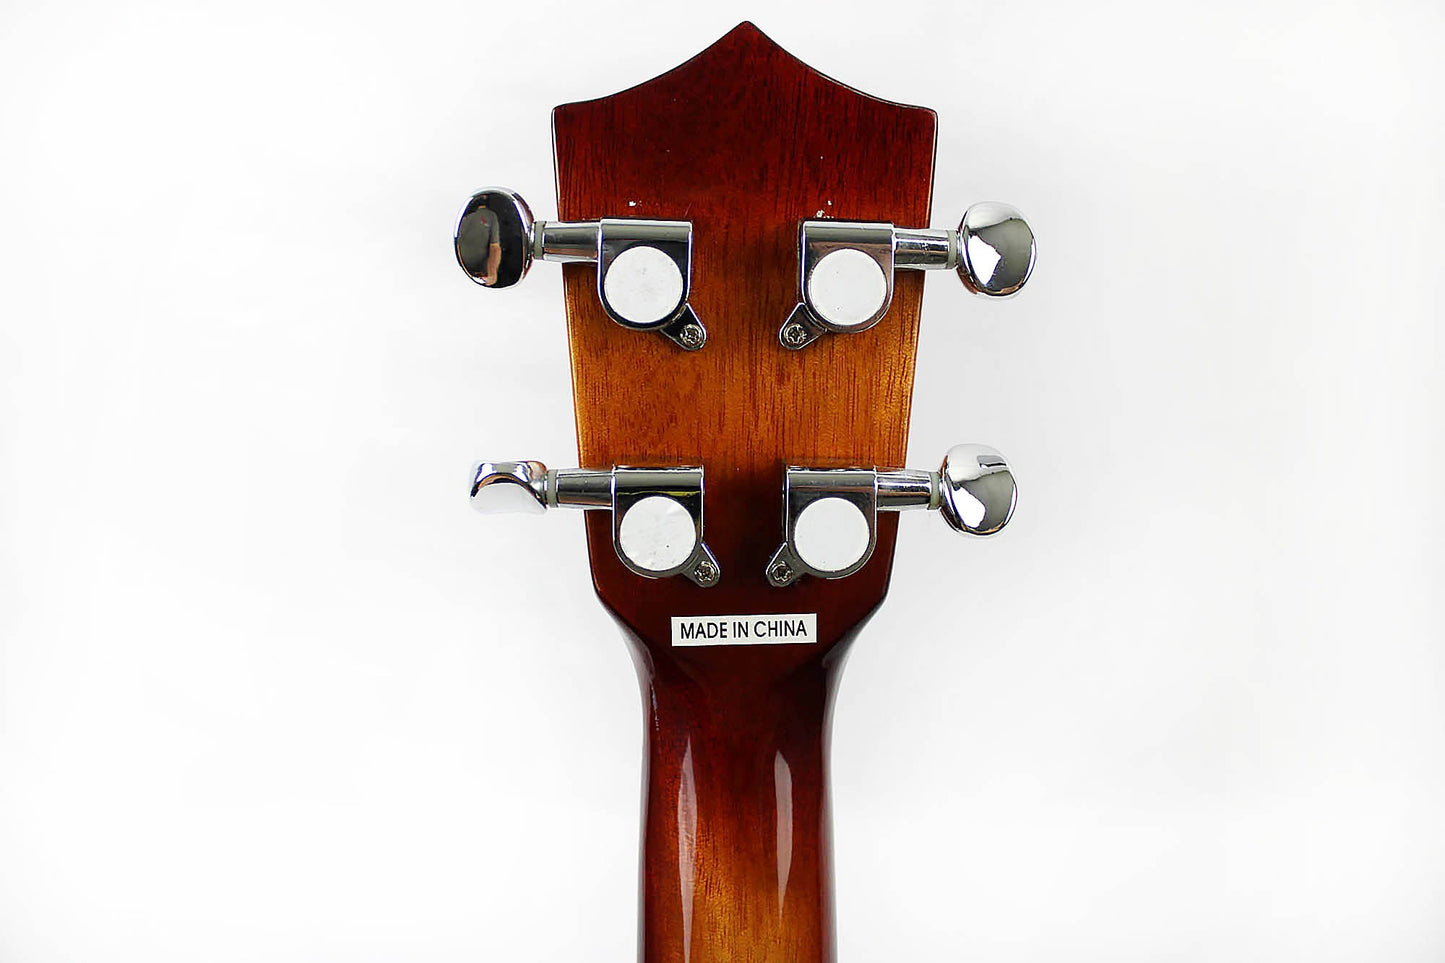 This is the back of the headstock of a Amahi UK-KOK-CEQ Concert Ukulele with EQ.